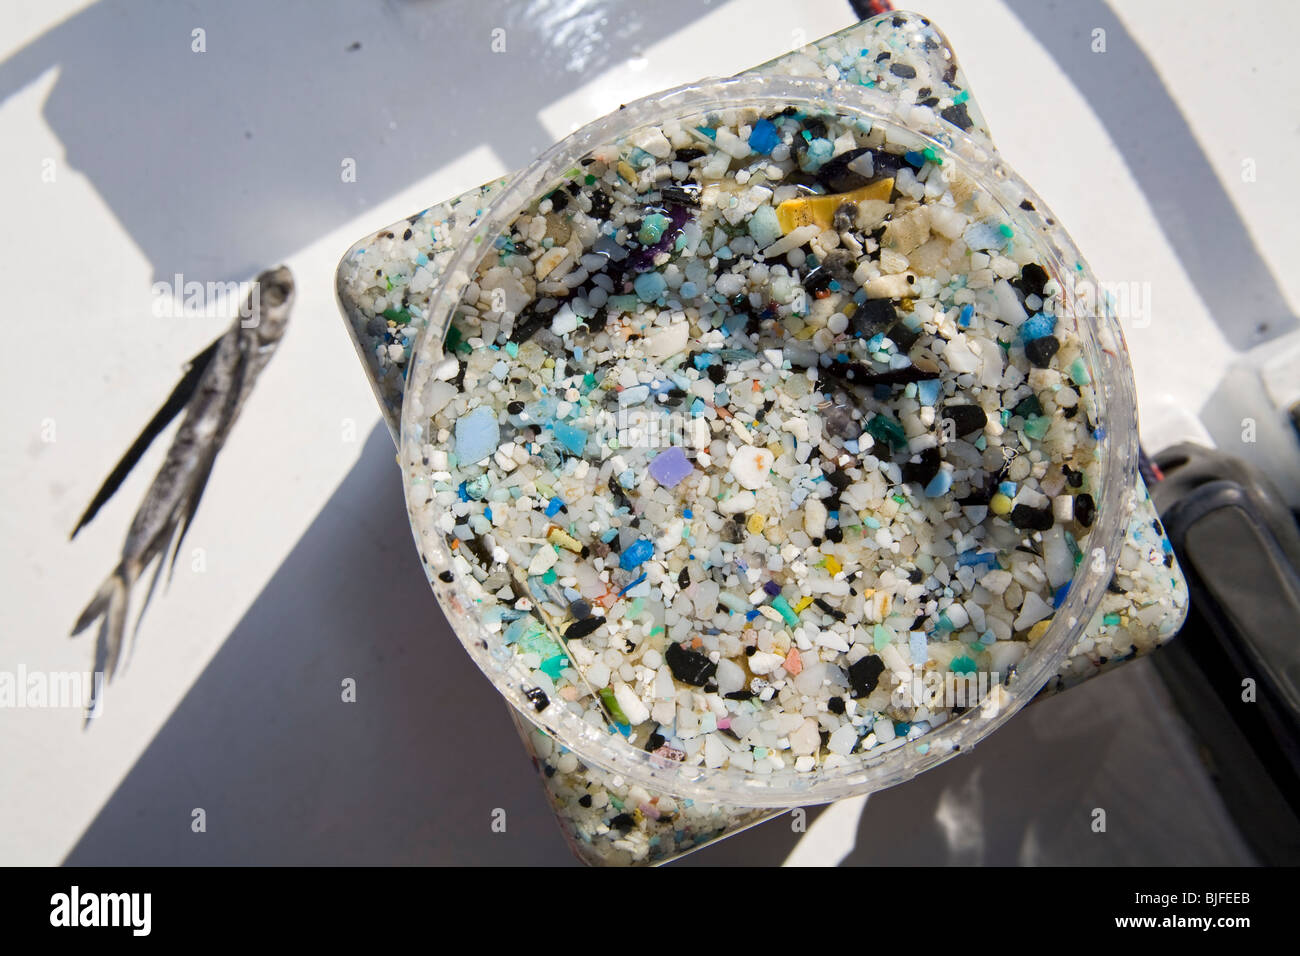 Plastic sample jars with Flying fish taken from trawls from the “great Pacific garbage patch'.  Long Beach, California, USA Stock Photo